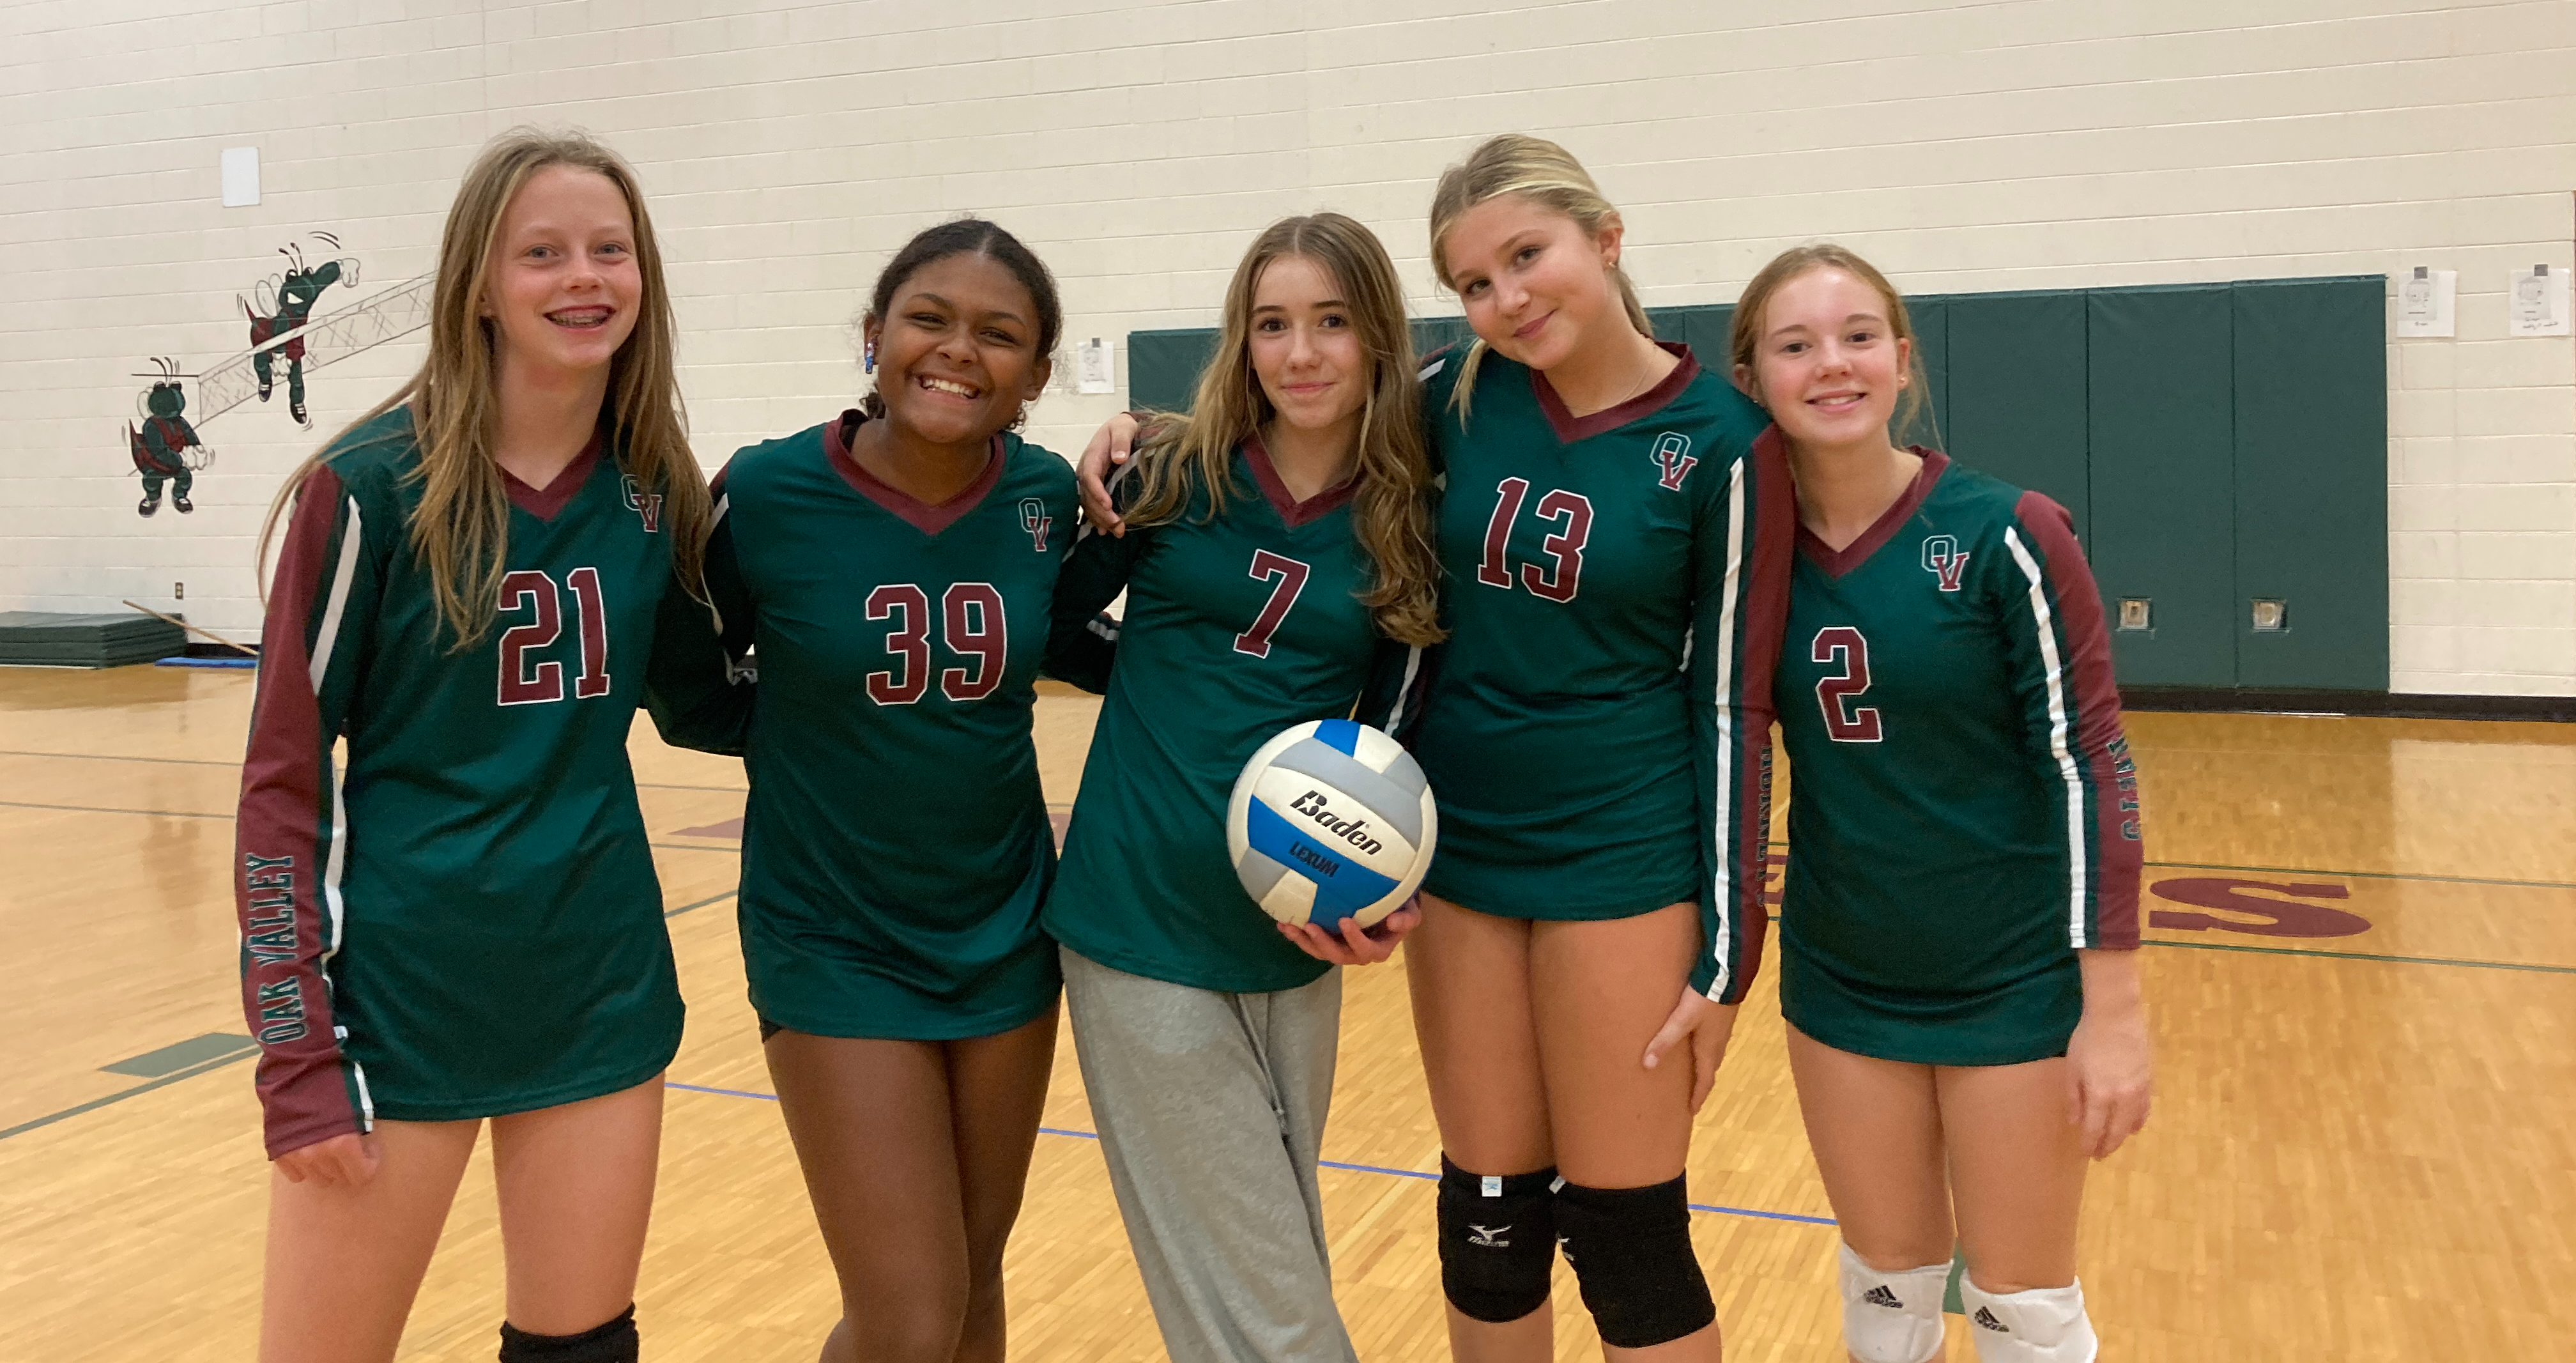 8th grade players with volleyball